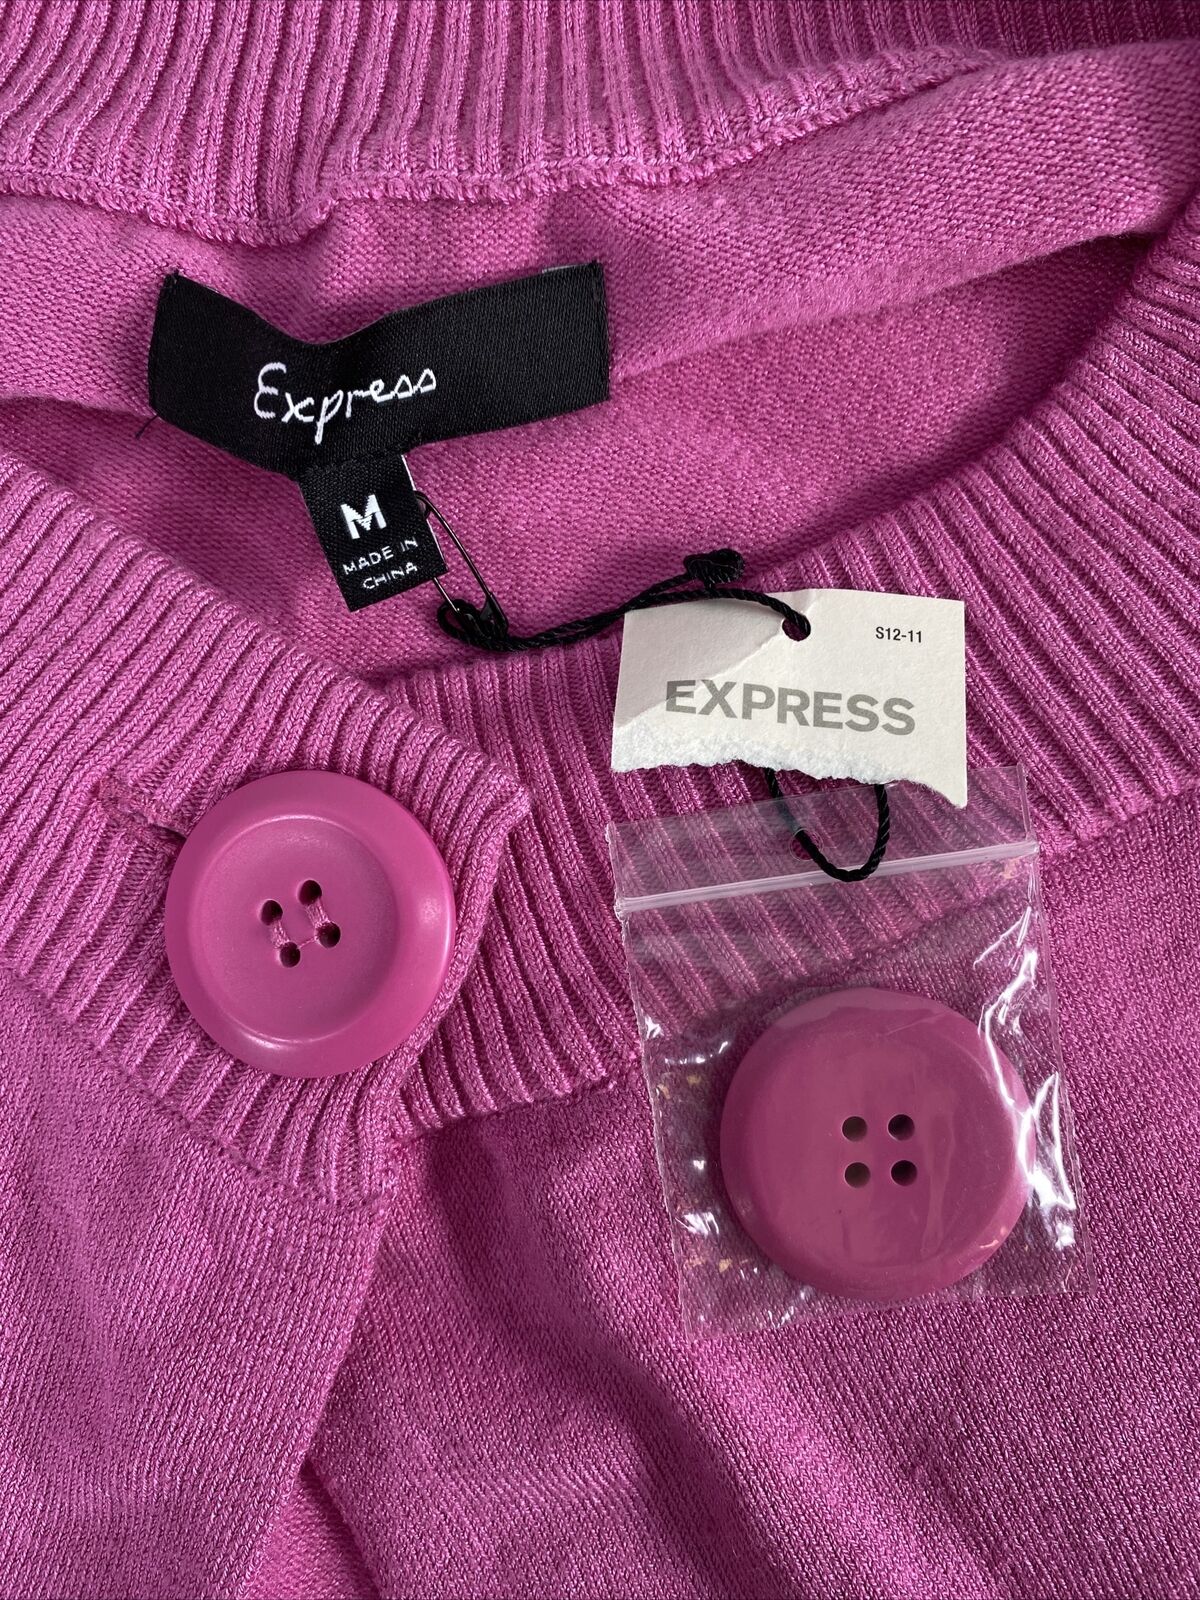 NEW Express Women's Pink One Button 3/4 Sleeve Cardigan Sweater - M